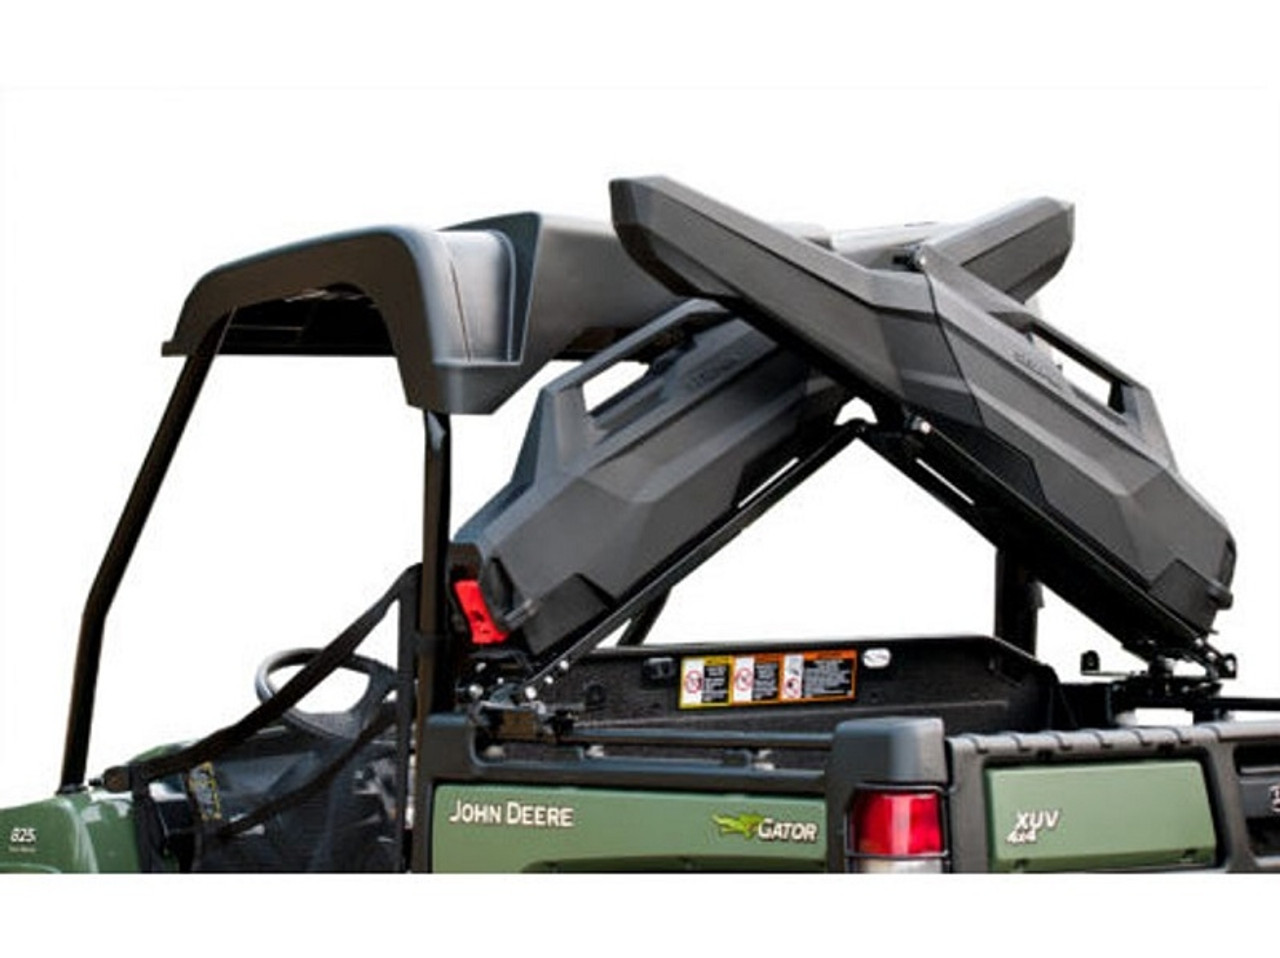 A picture of the Armory X-rack mounted on a John Deere Gator against a blank background.